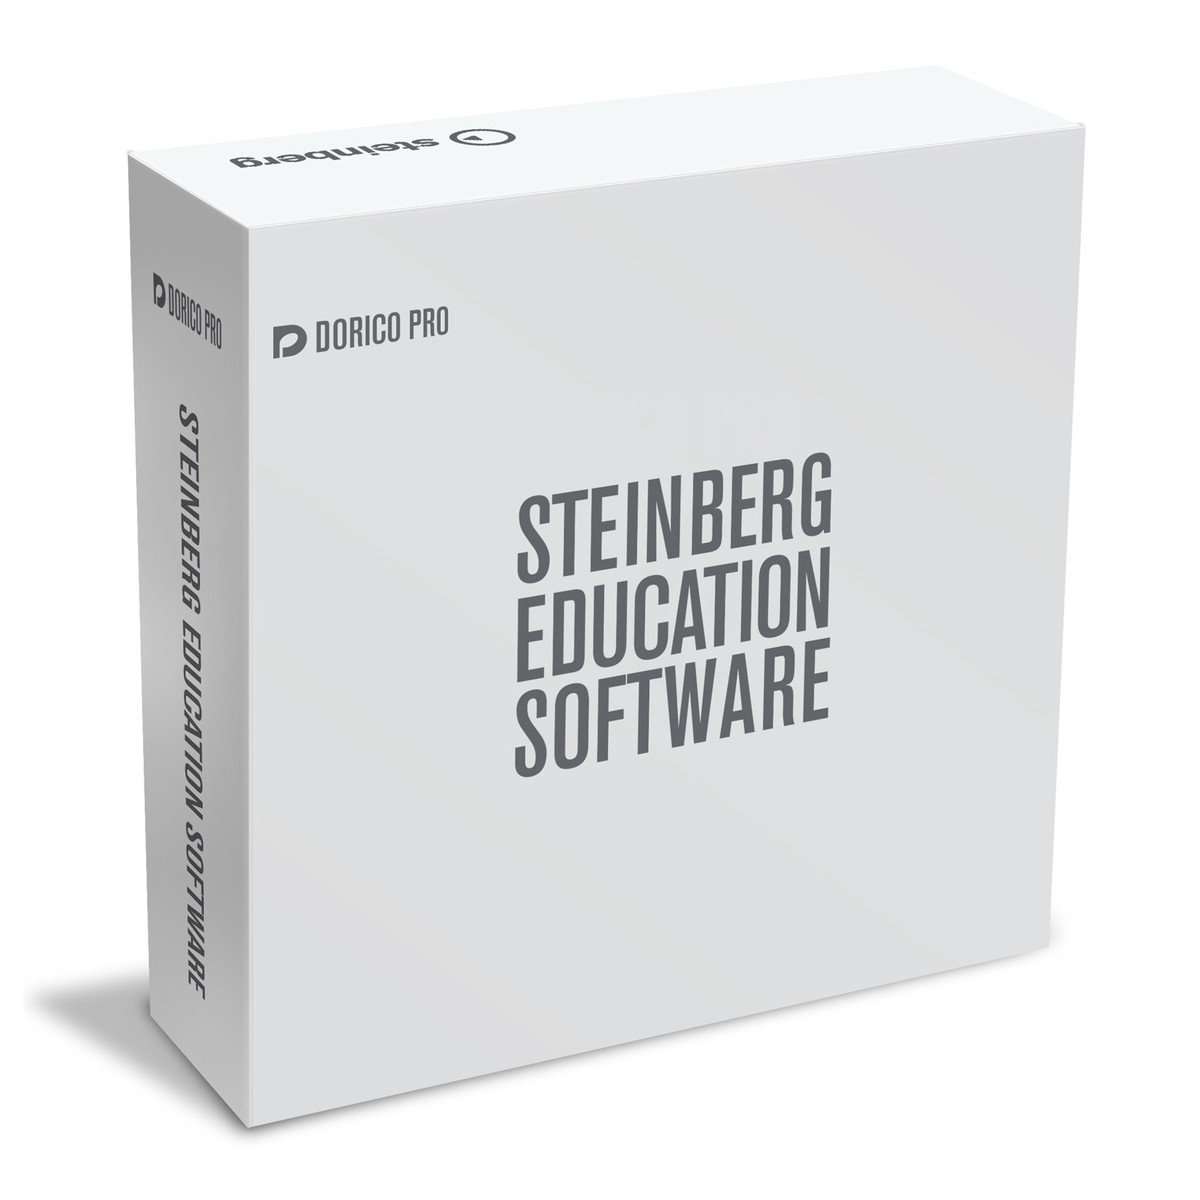 download the last version for android Steinberg Dorico Pro 5.0.20